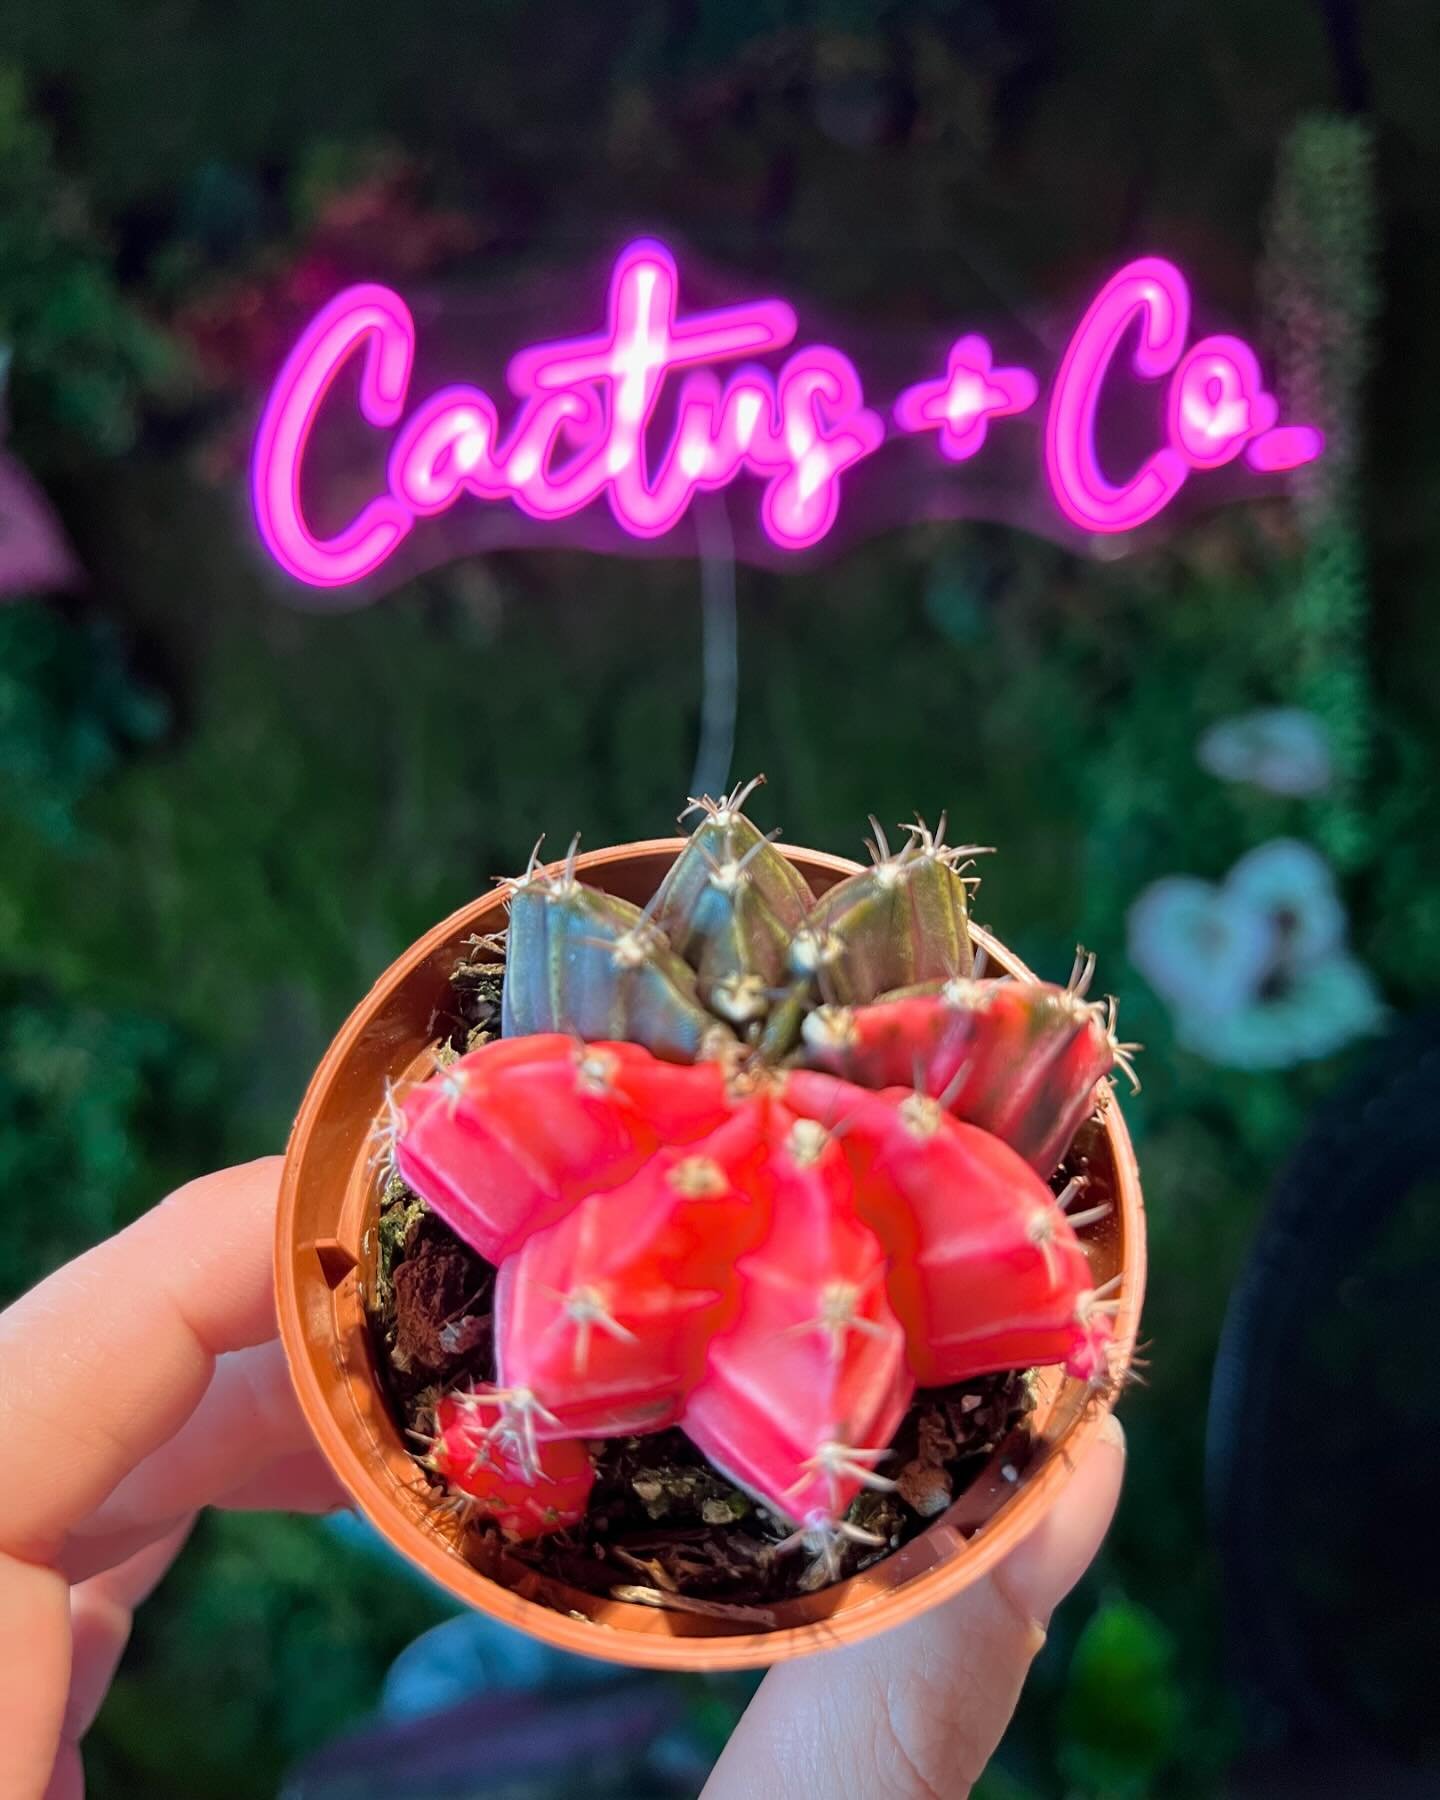 NEW MINI CACTI JUST IN FROM THE GREENHOUSE 🌵 so many are in bloom too 😍 come grab your favorite!